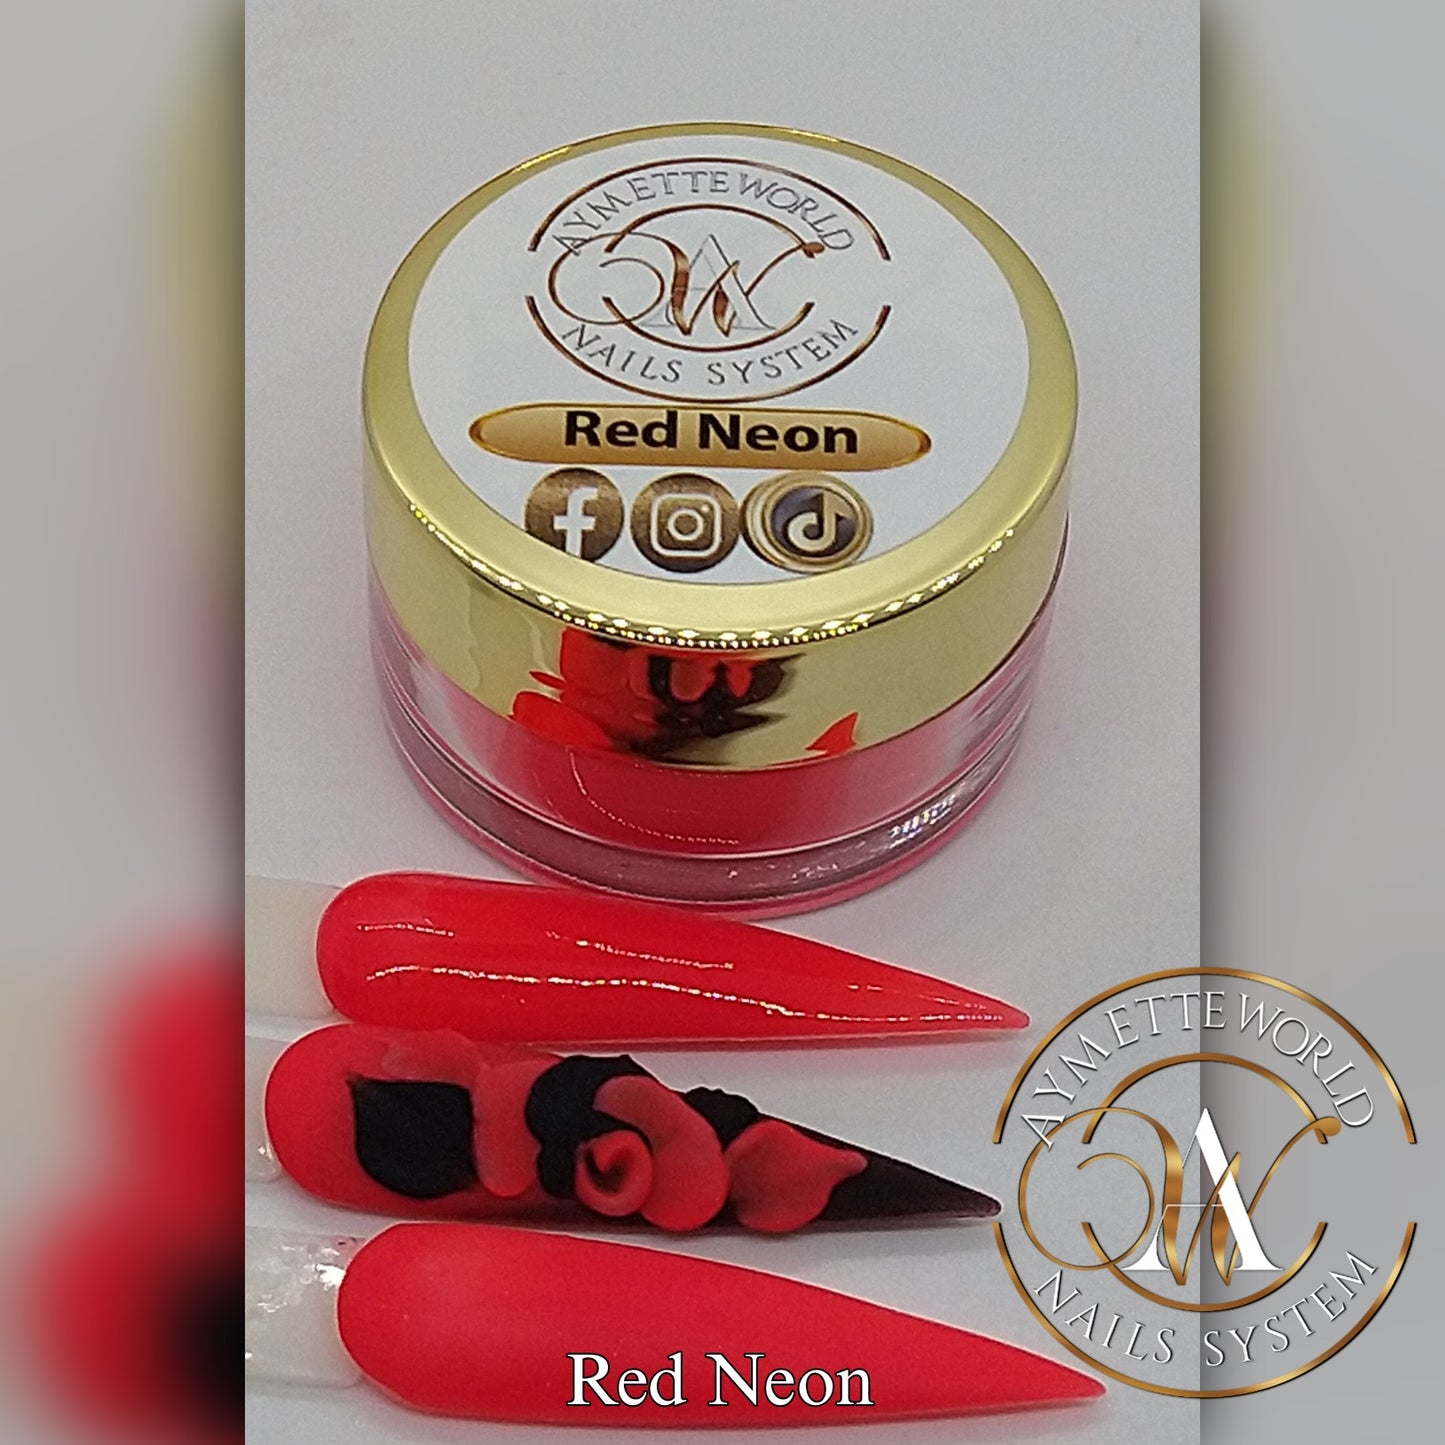 AW Acrylics Red Neon 20g